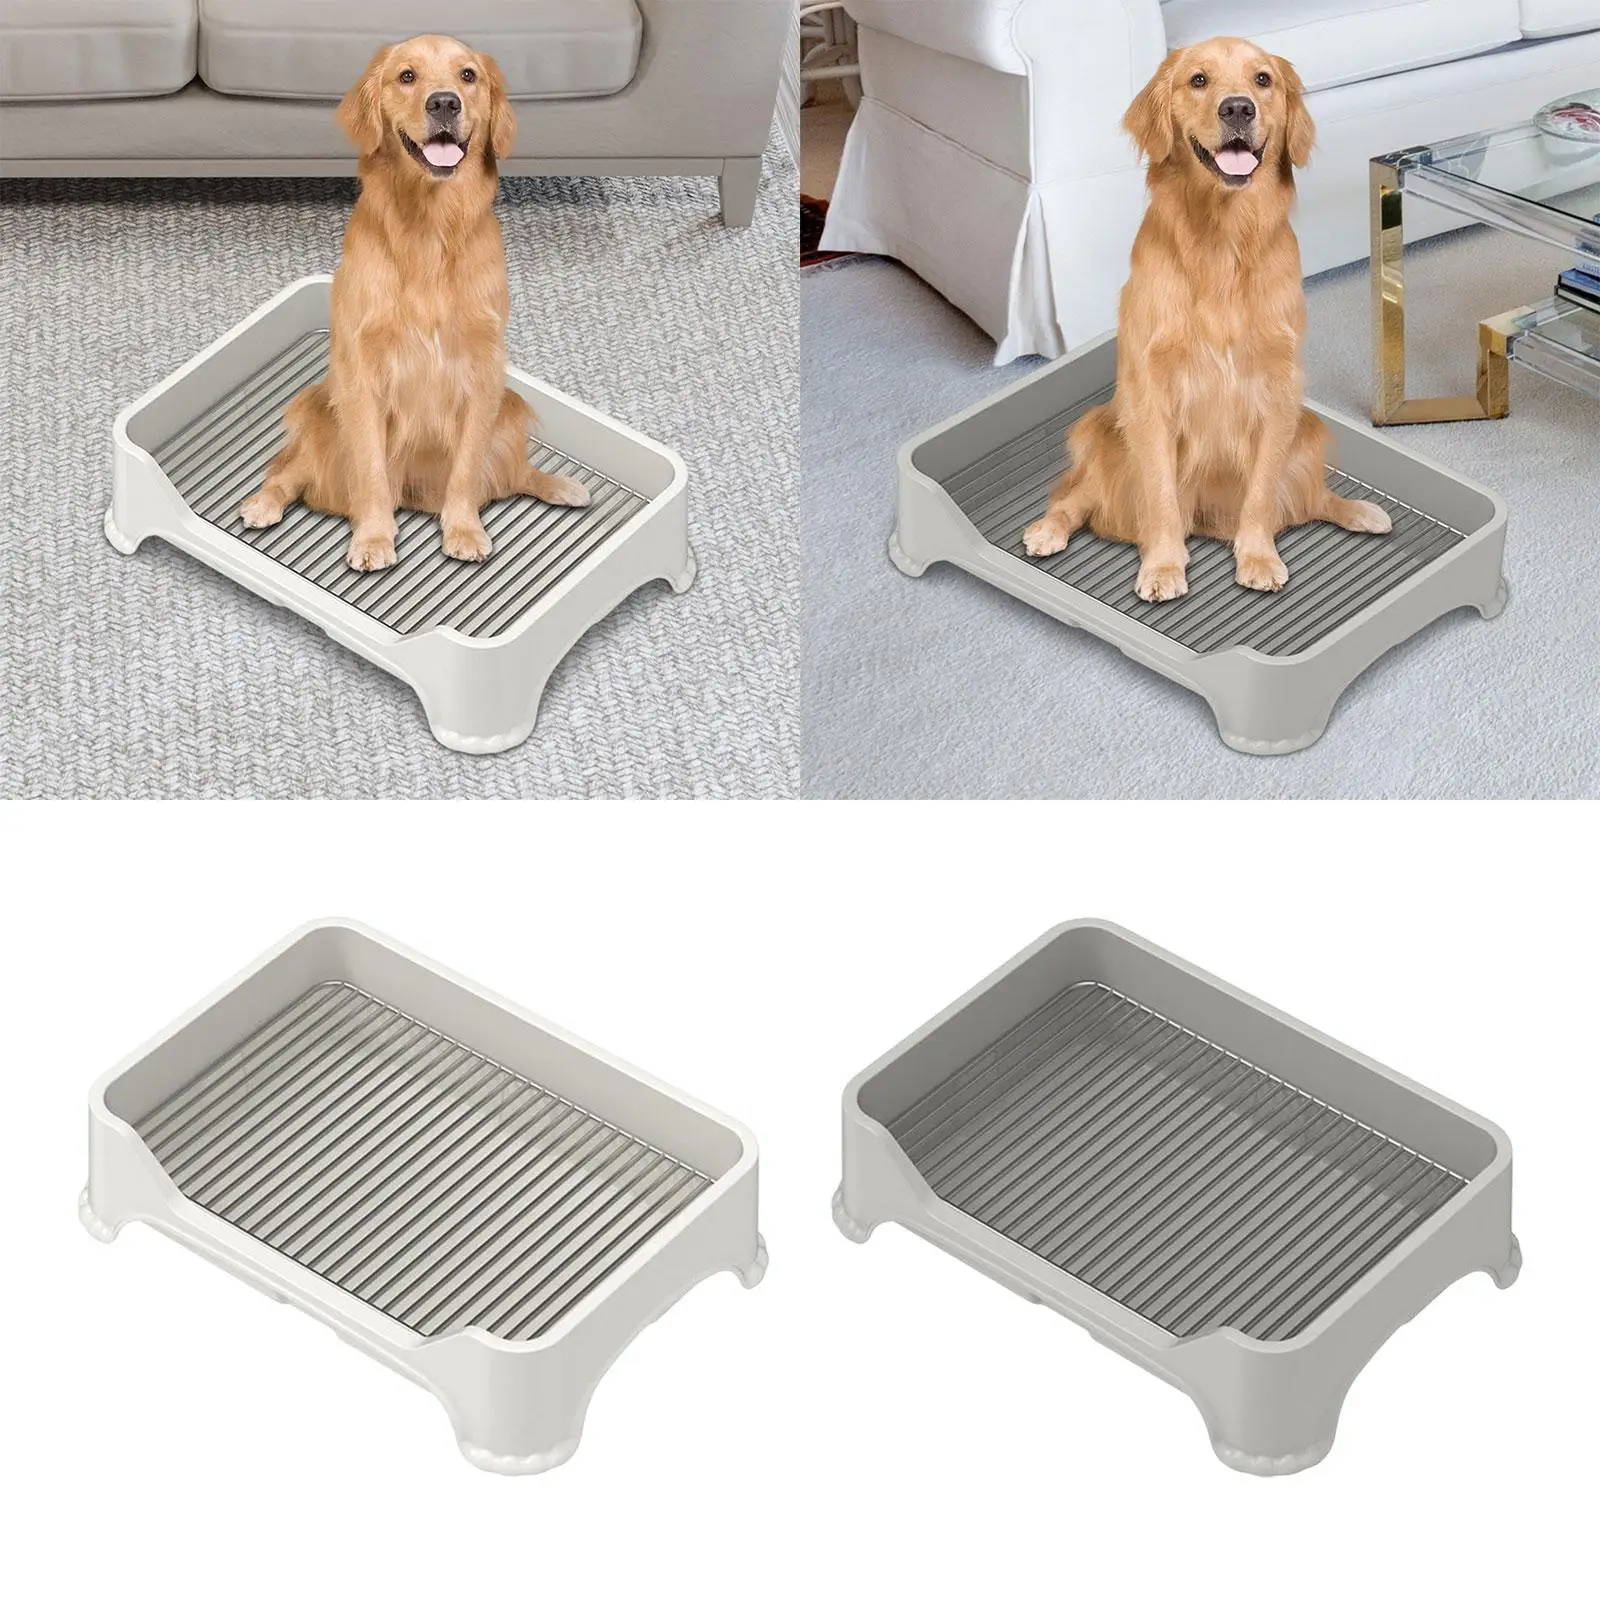 Dog Toilet Pet Litter Pan Training Pad Holder Outdoor Removable Dog Potty Tray Puppy Potty Tray Puppy Litter Box Pet Accessories